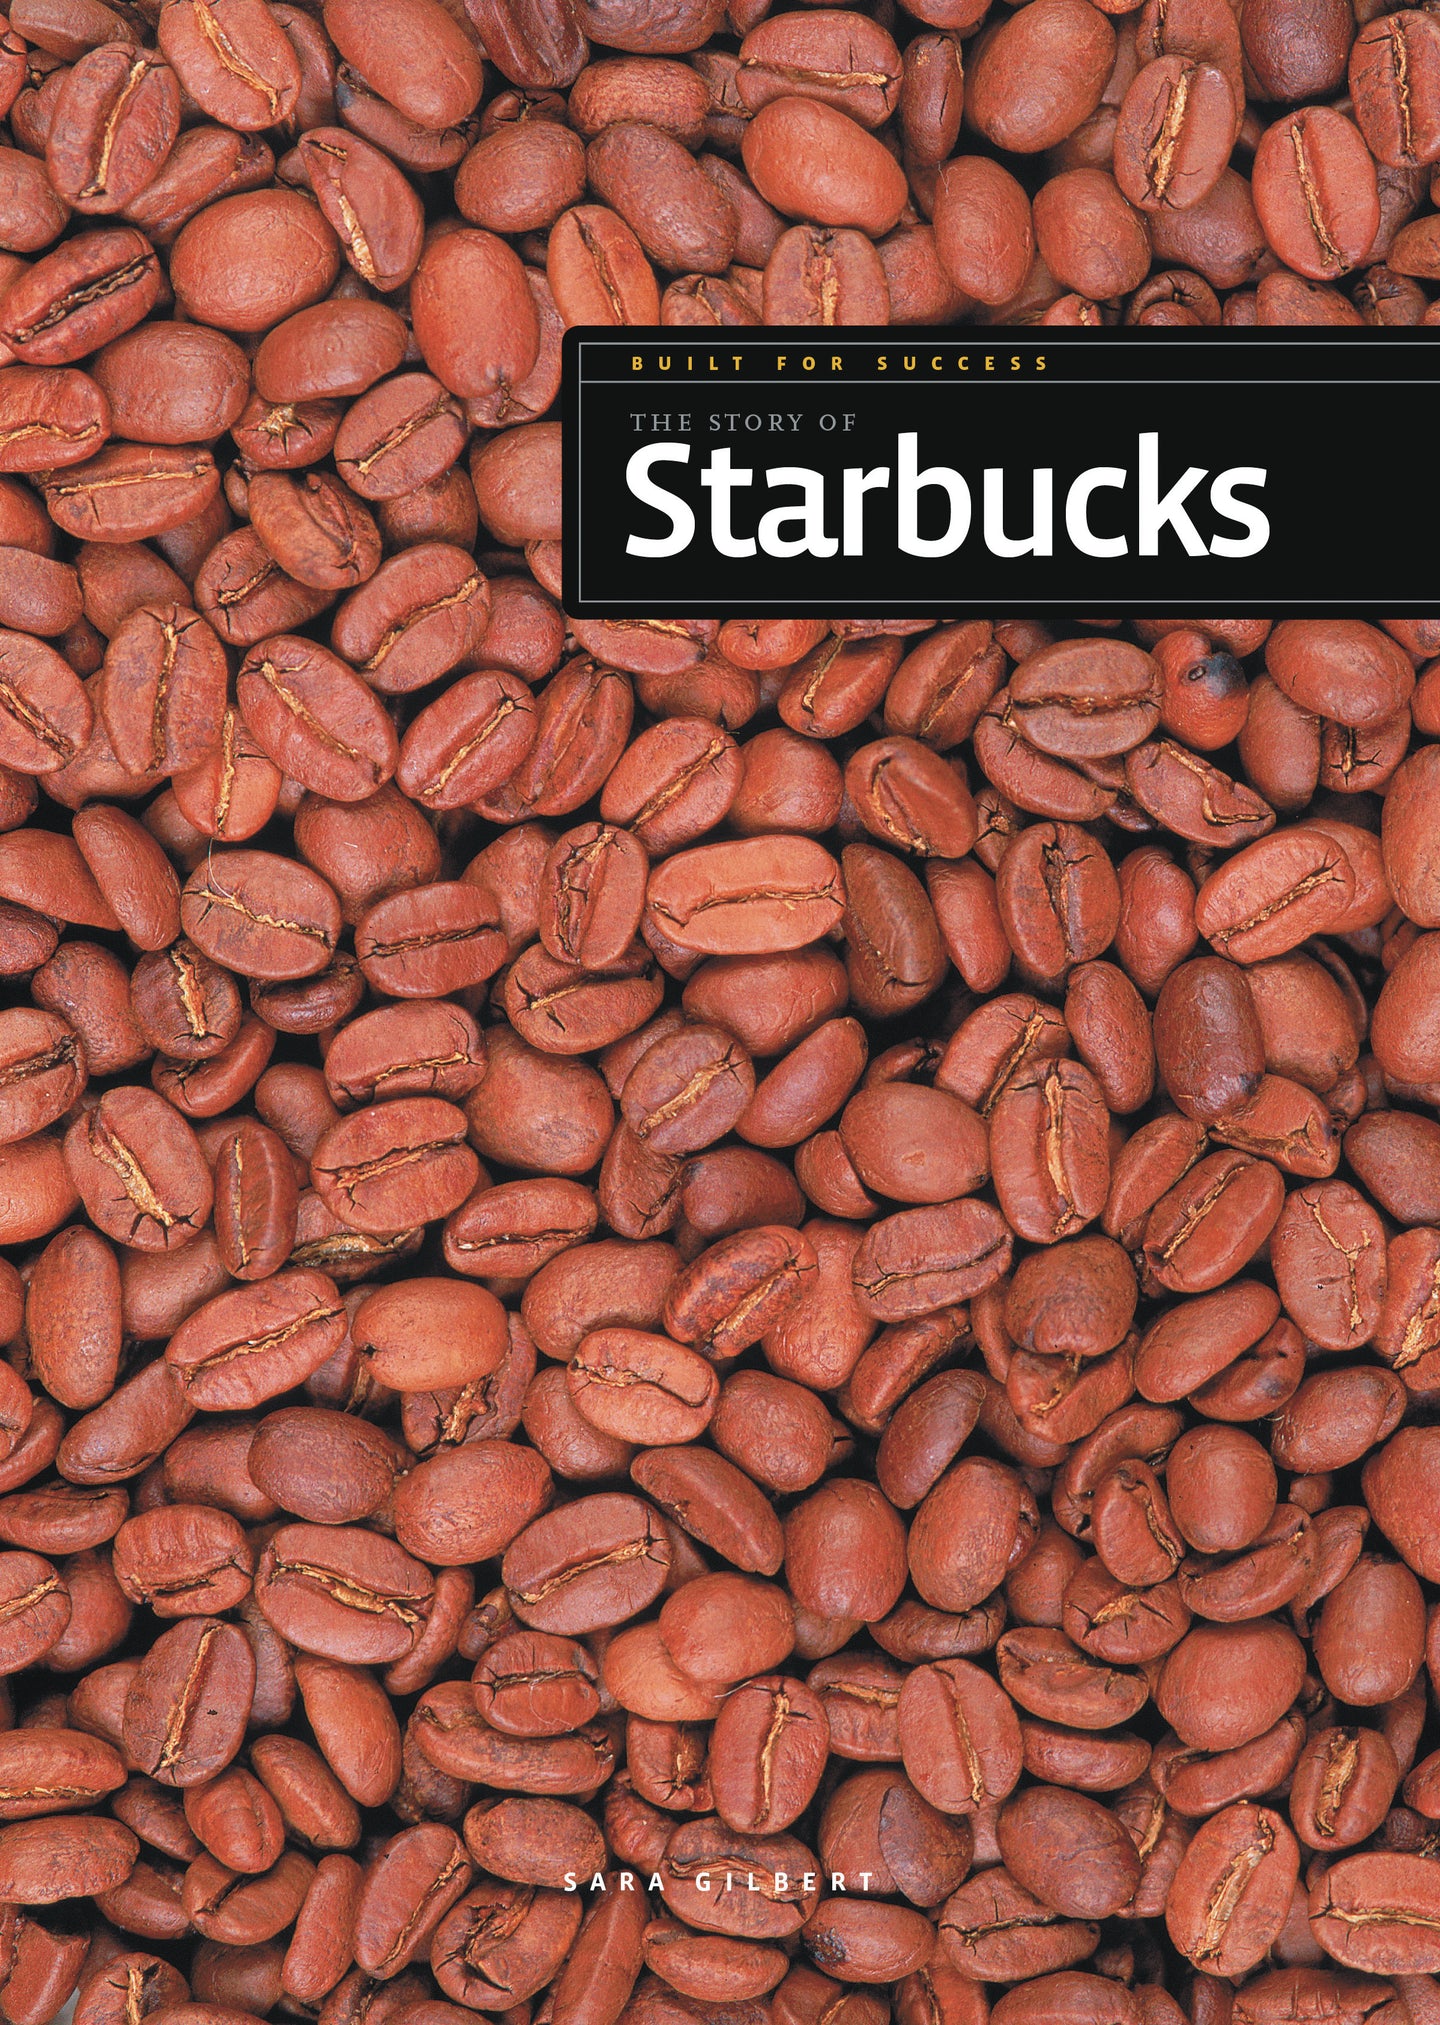 Built for Success: The Story of Starbucks